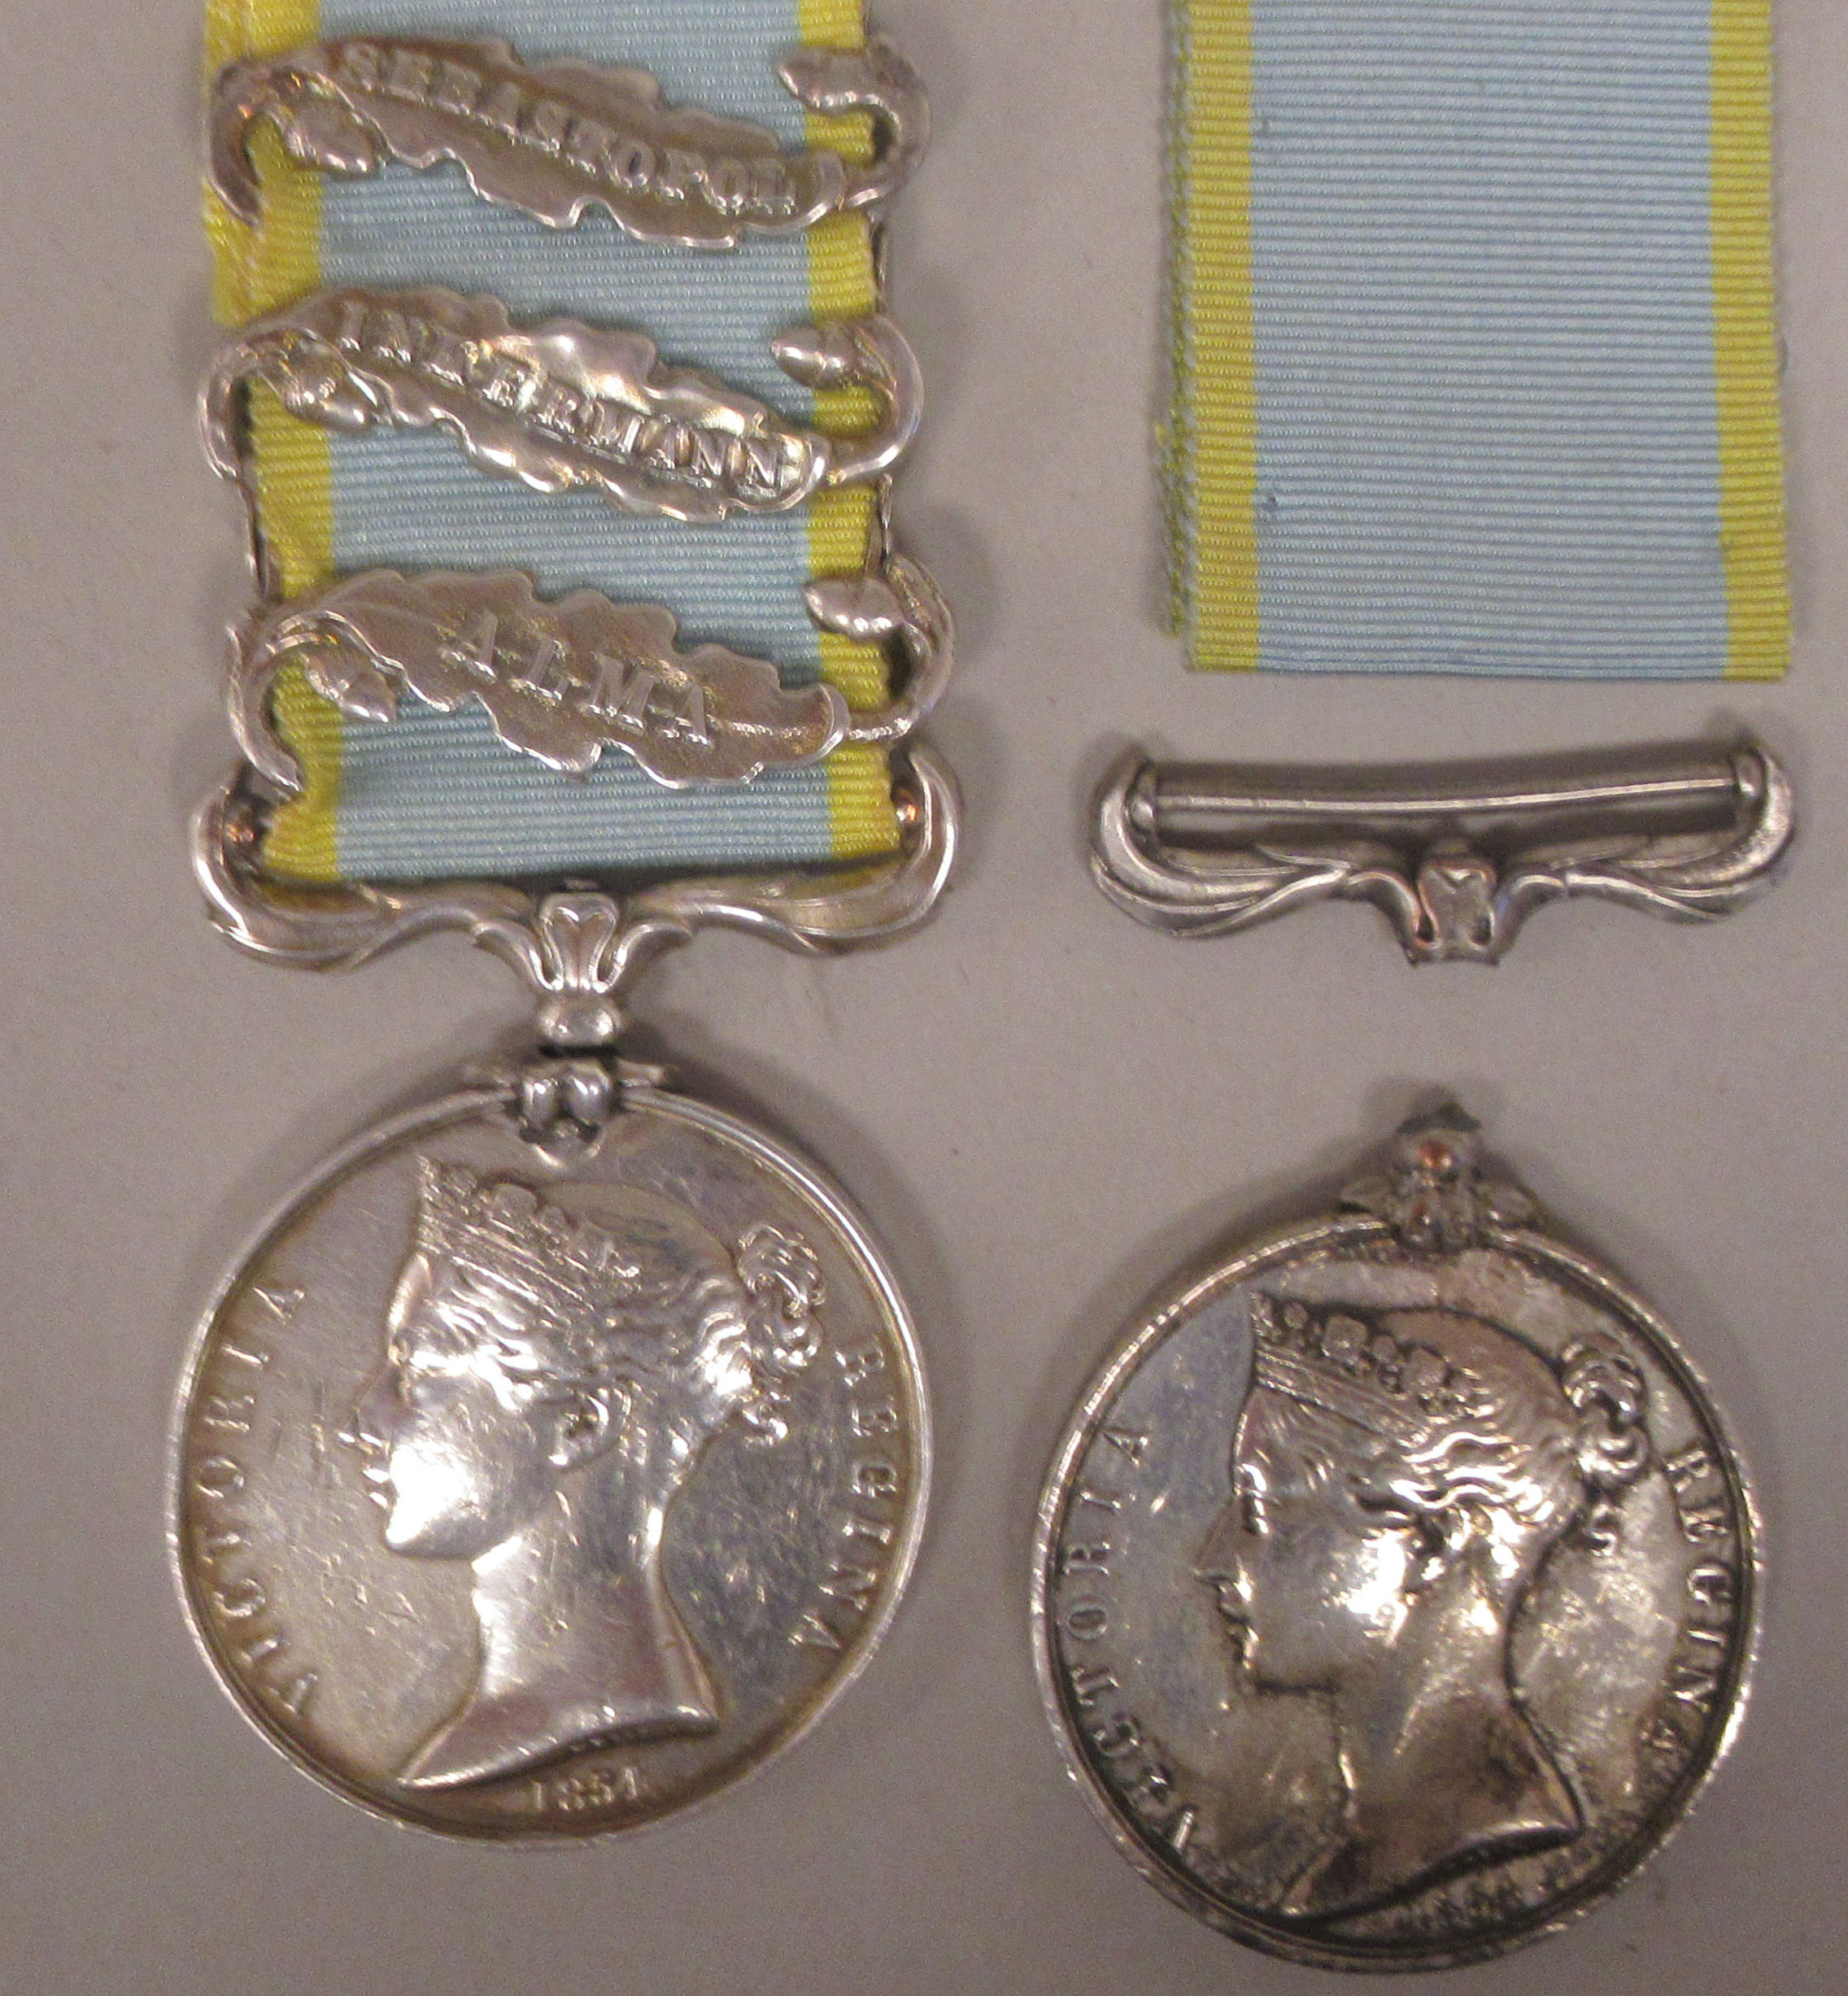 A Crimea medal with Queen Victoria's profile portrait on the obverse and ribbon; three oakleaf